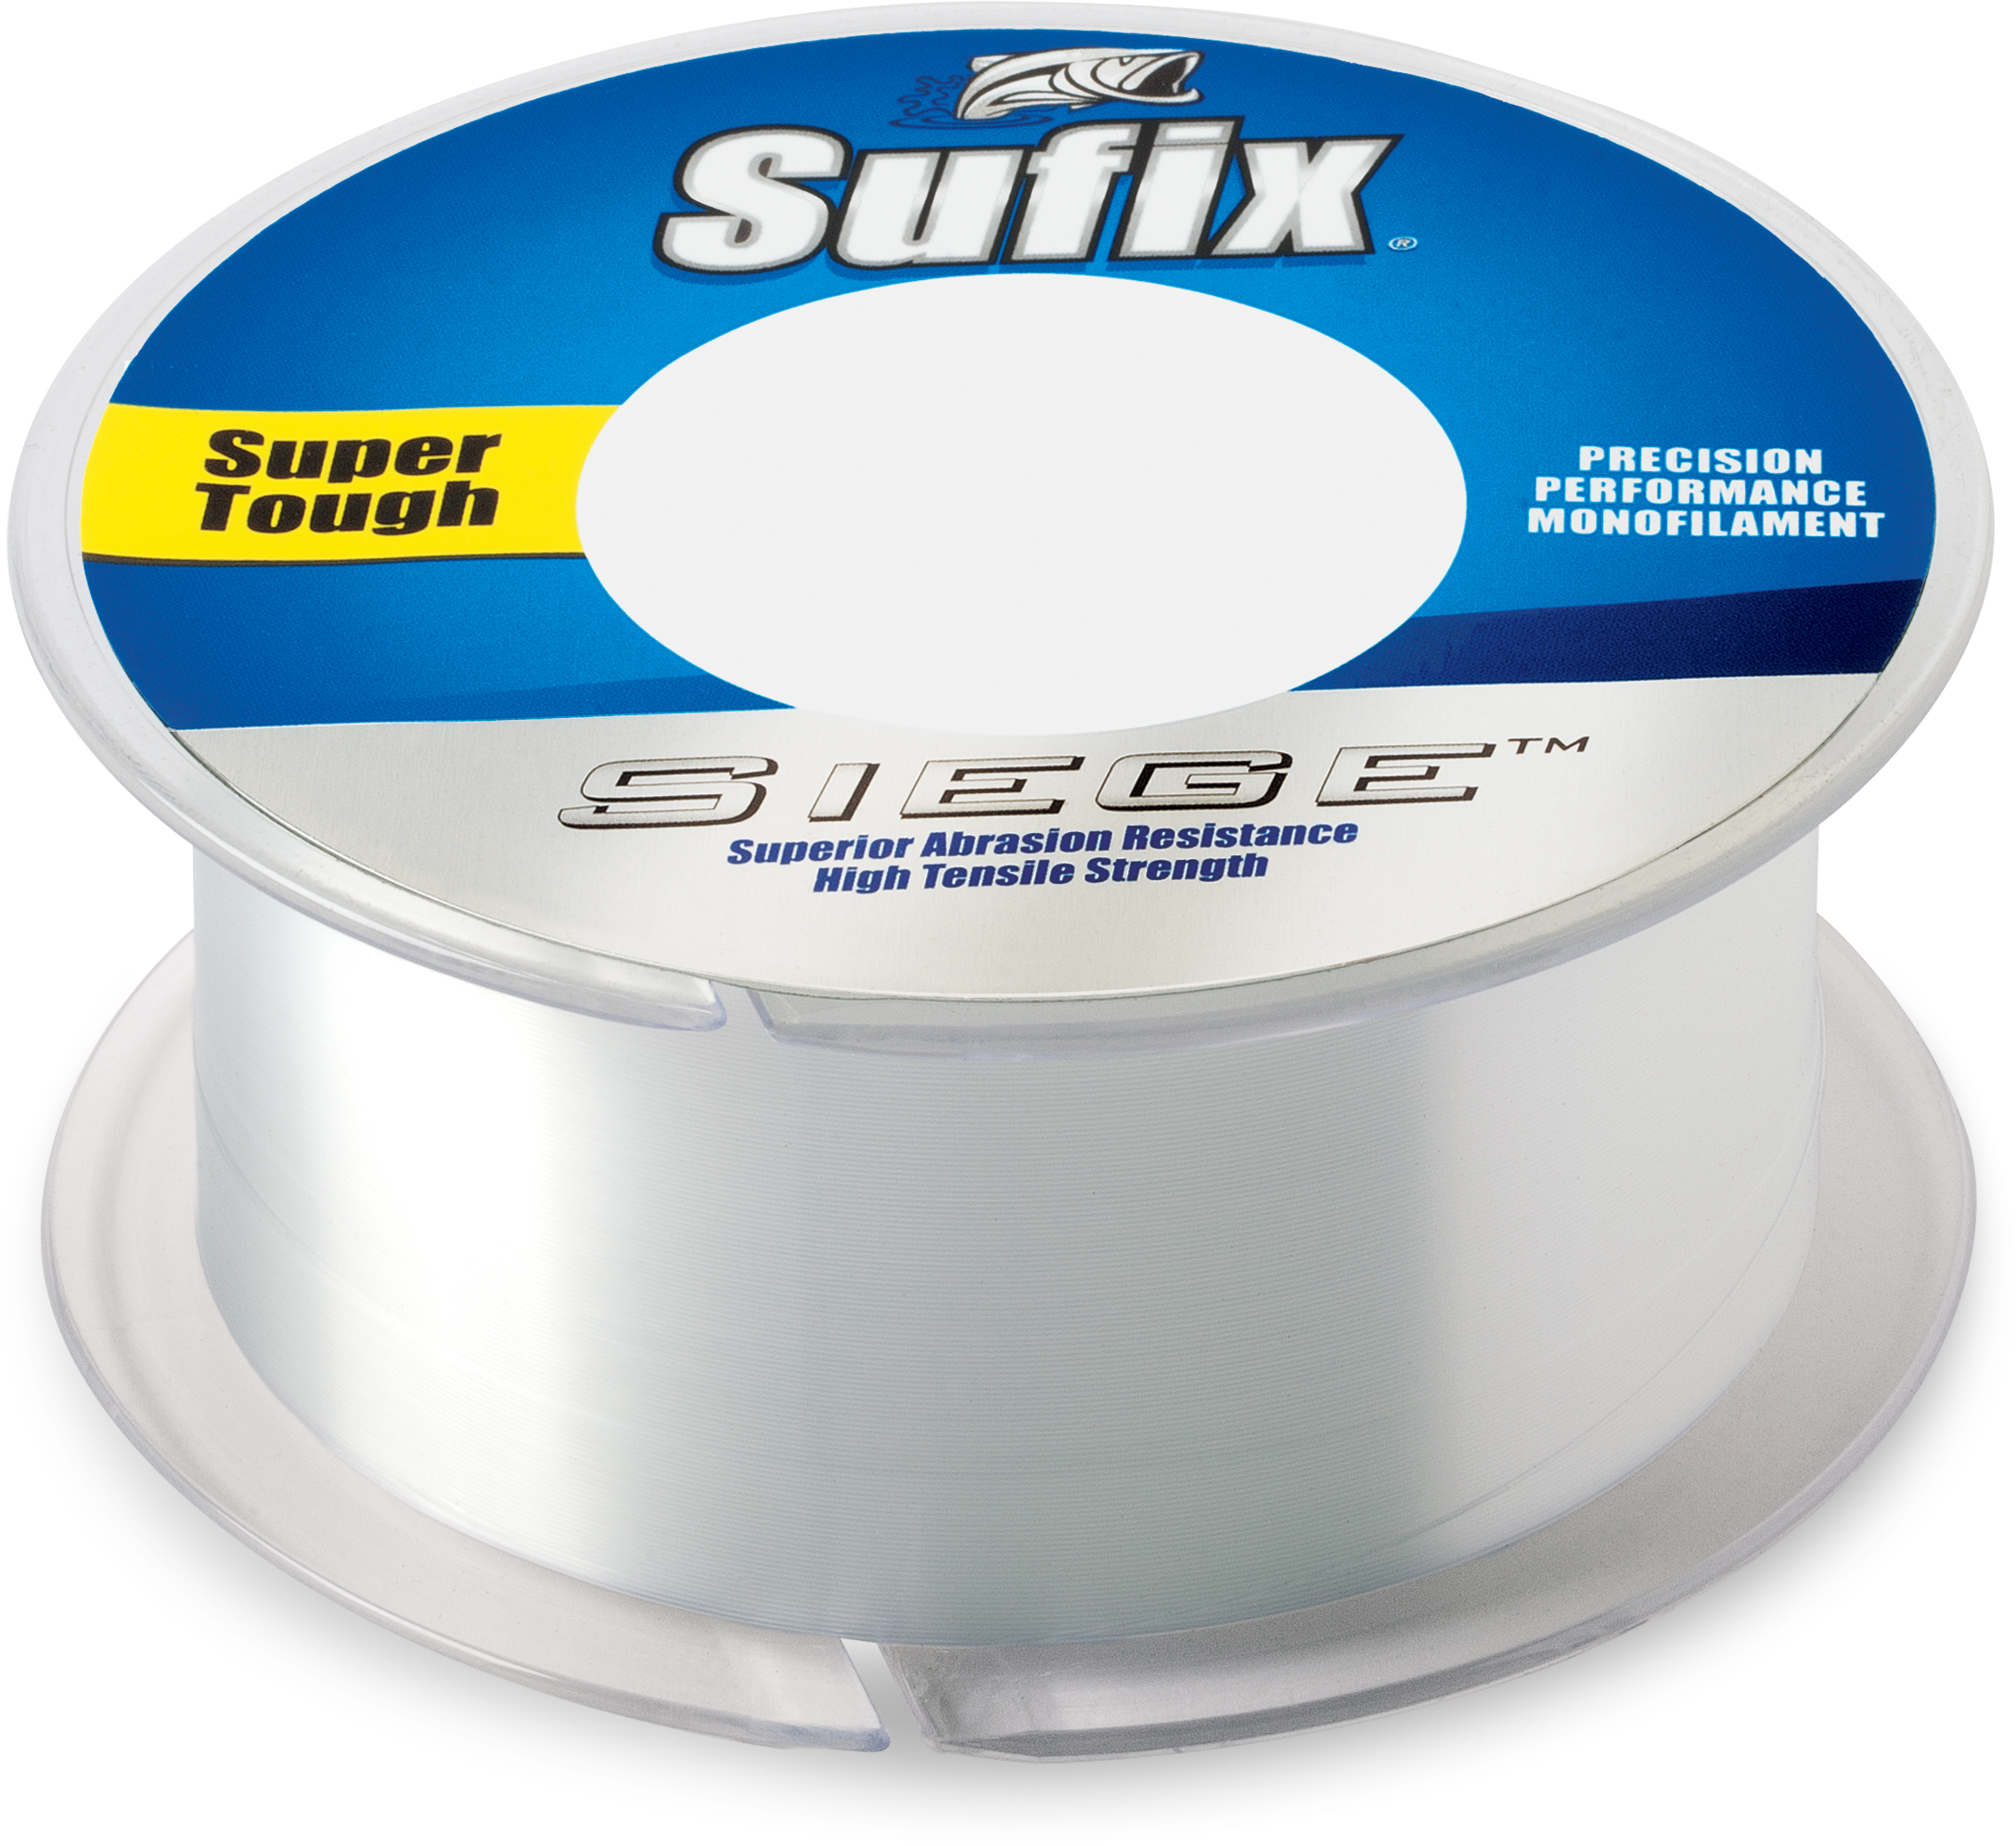 https://www.precisionfishing.com/img/products/025/025%20Sufix%20Siege%20Monofilament%20Fishing%20Line%20330%20Yds%20-%20Clear.jpg